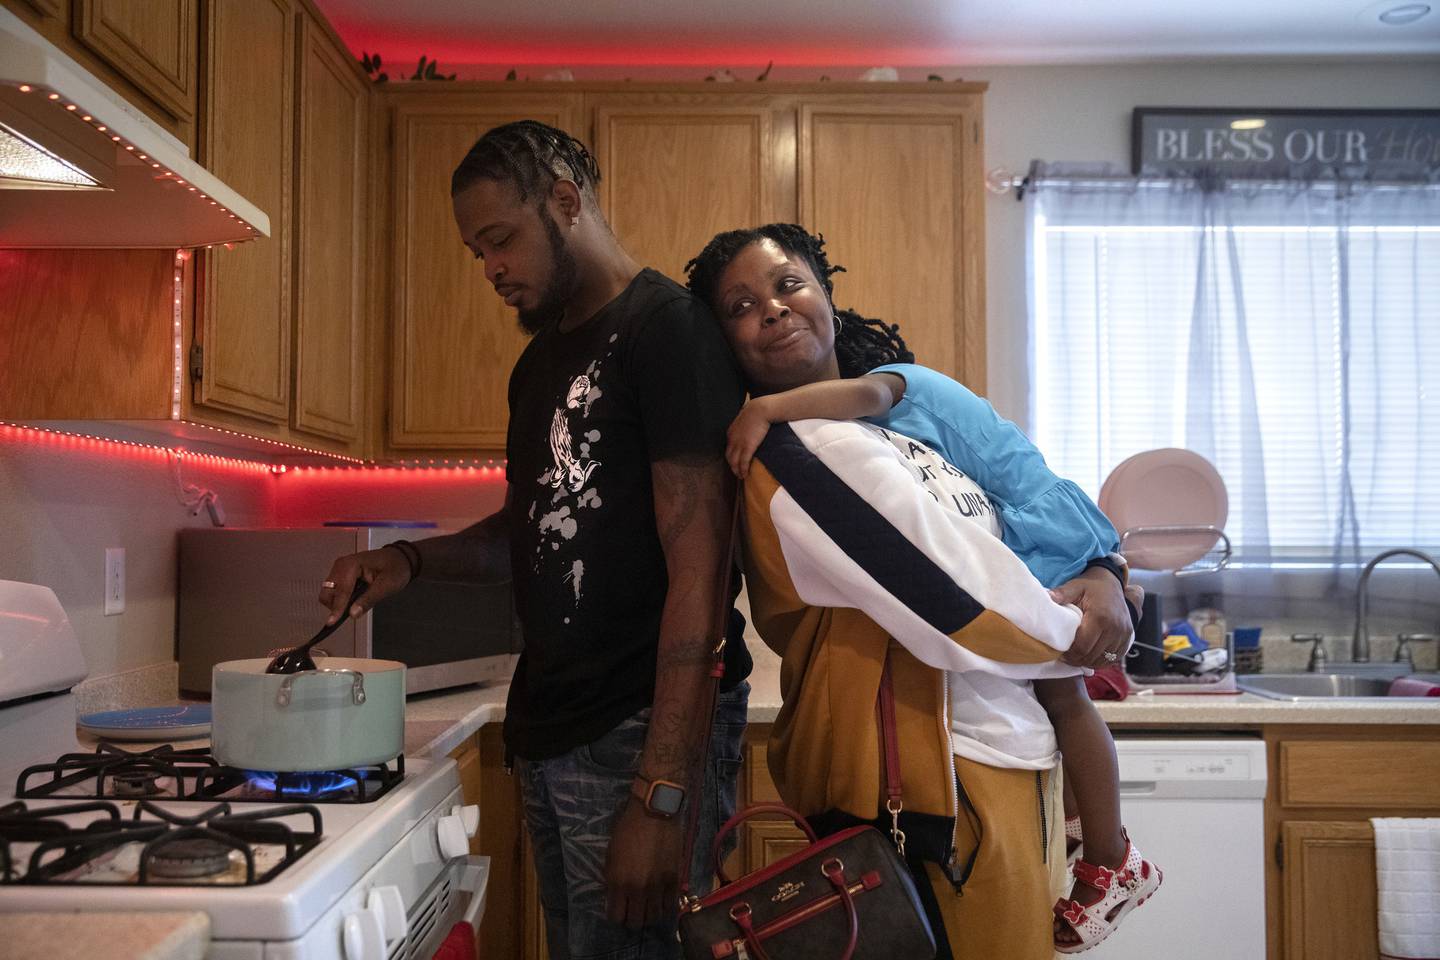 Sandra Brown holds her granddaughter Azariah Dobbs, 2, as her son Gregory Dobbs, 31, cooks at his home in Las Vegas on April 26, 2022. After spending 22 years in the Illinois prison system, this was Brown's first visit to Las Vegas and only the second time seeing her grandchildren outside prison walls. 